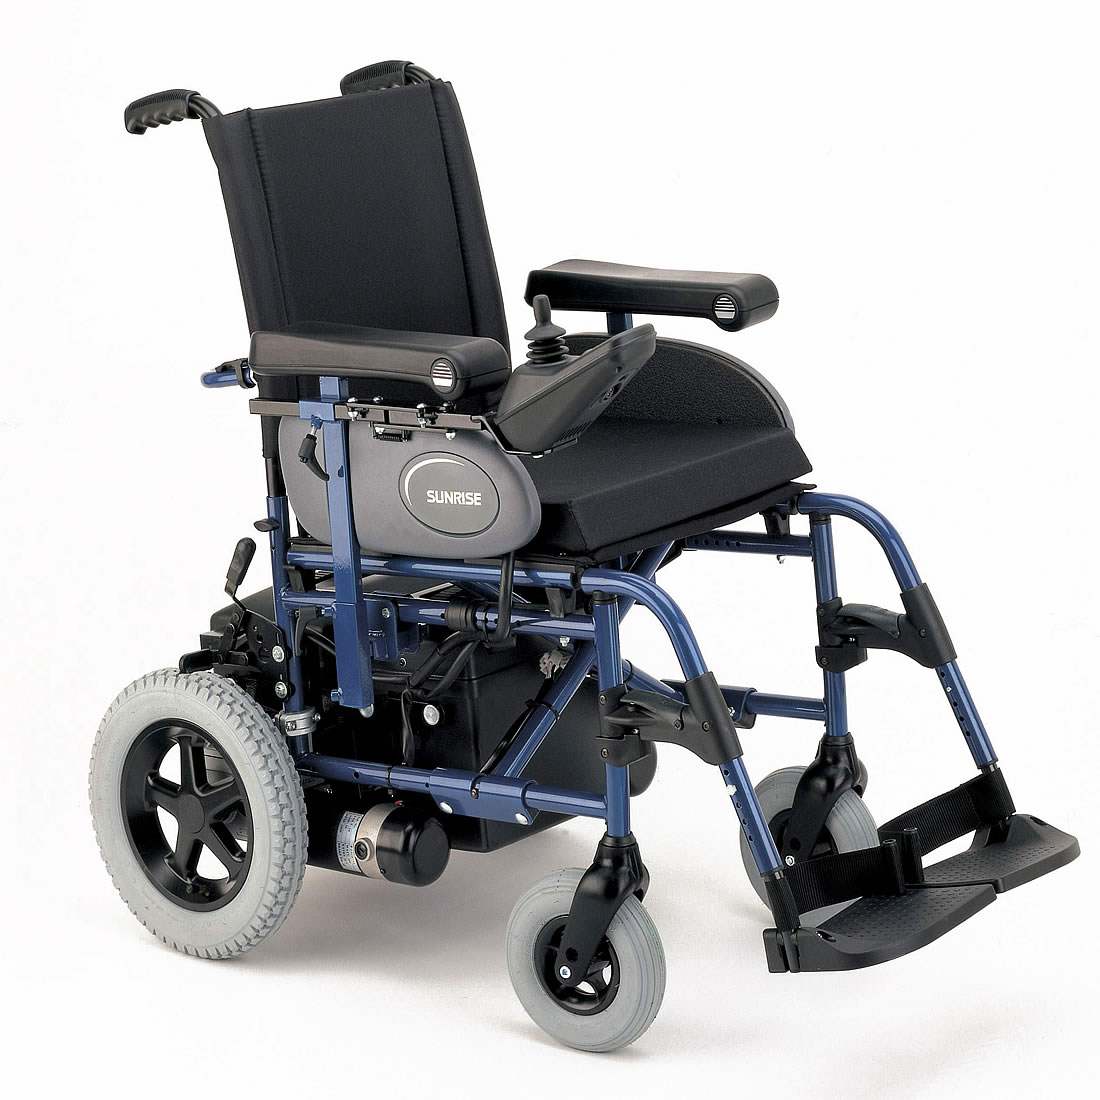 Sicily accessible holidays rent electric wheelchair equipment